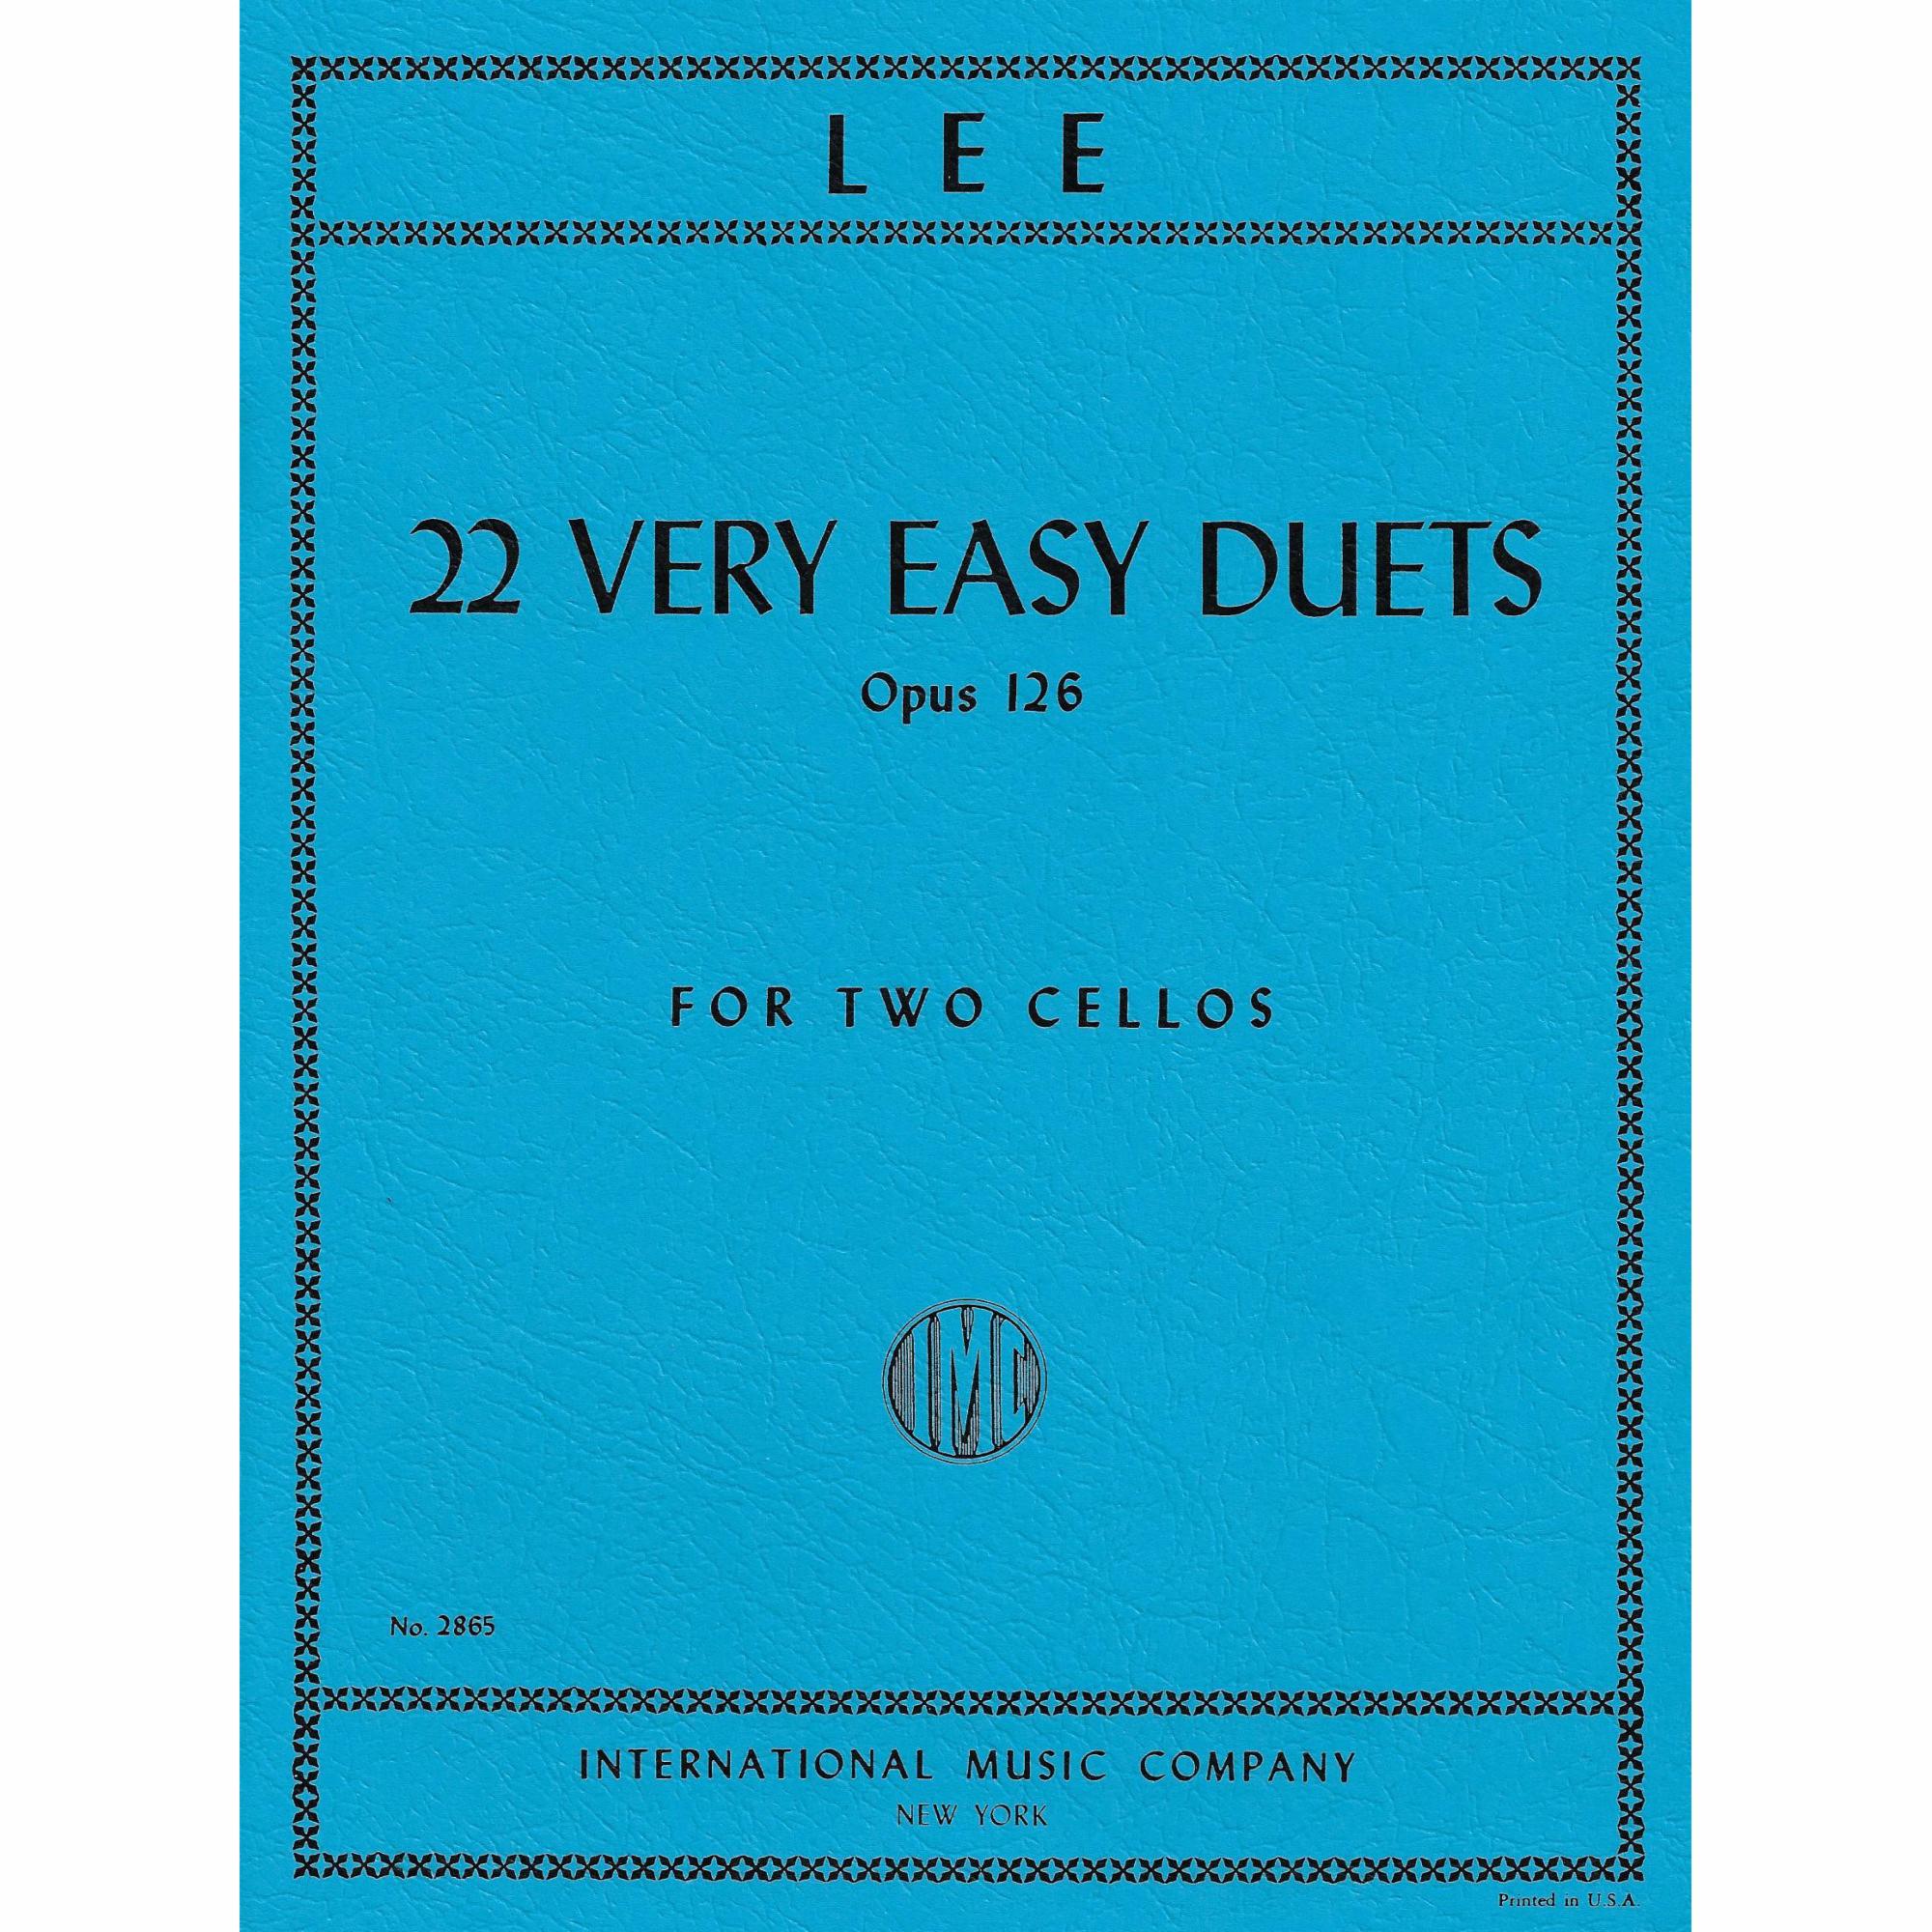 Lee -- 22 Very Easy Duets, Op. 126 for Two Cellos